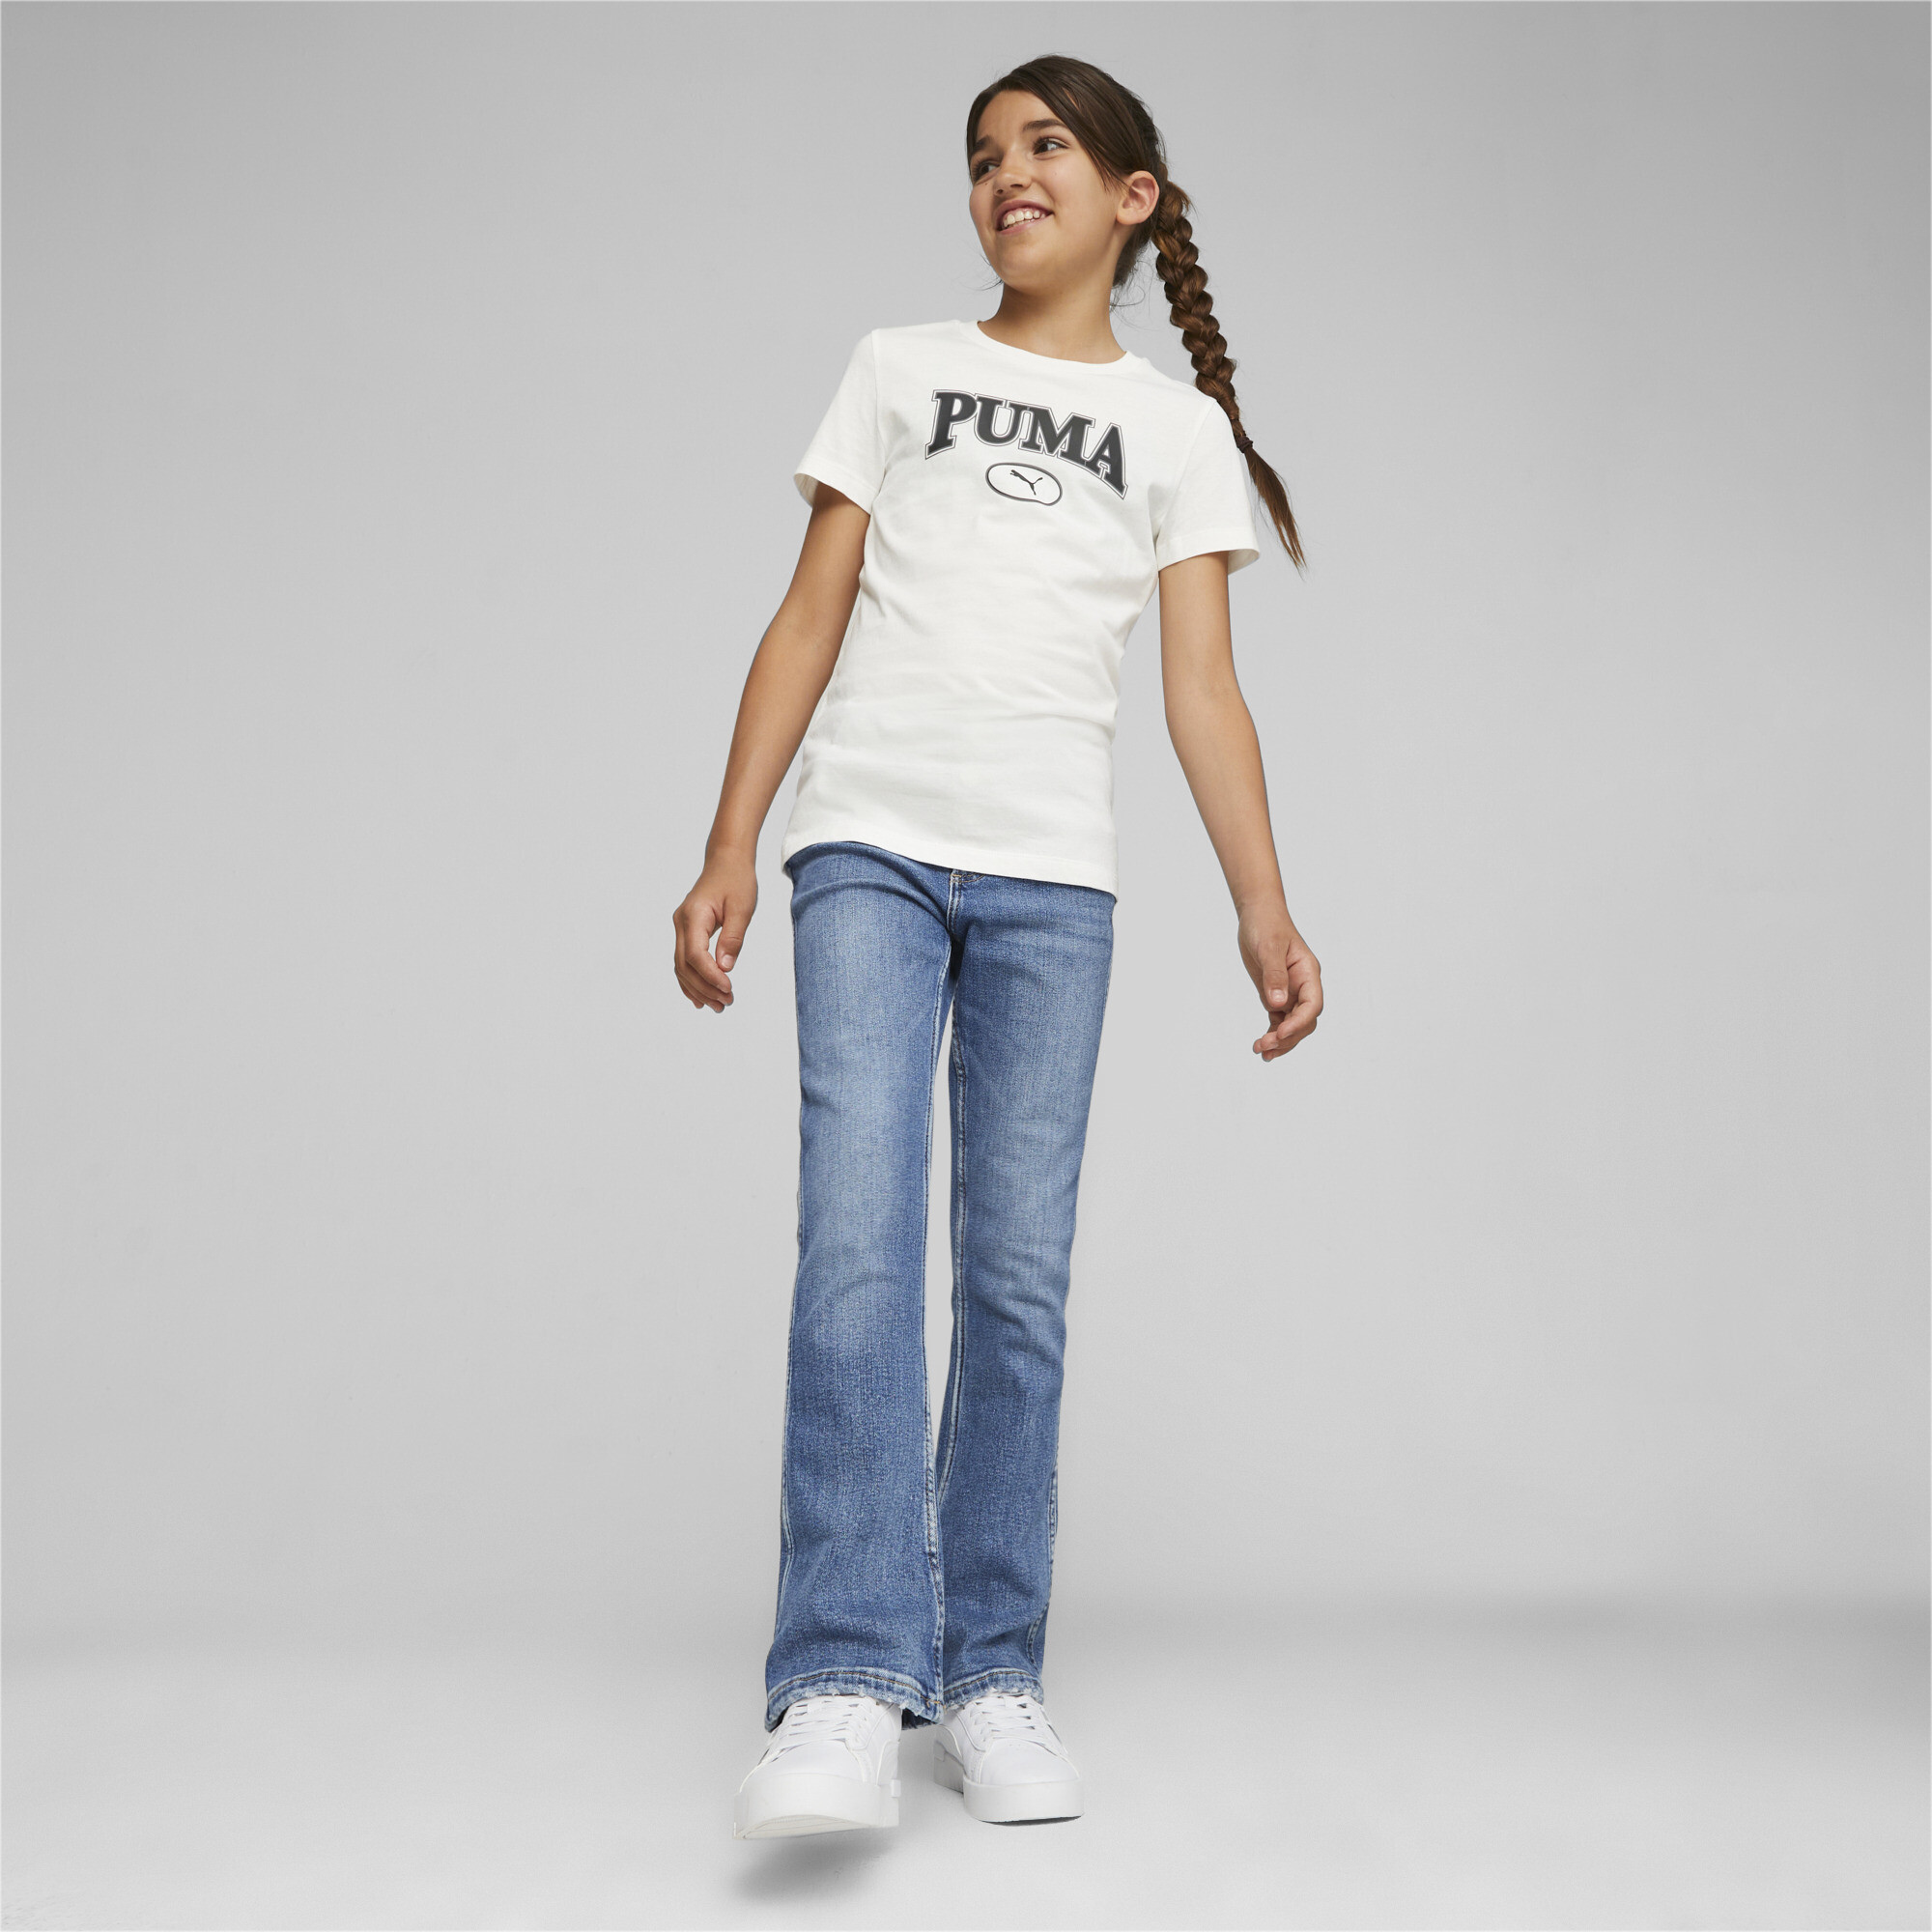 PUMA SQUAD Graphic T-Shirt In White, Size 13-14 Youth